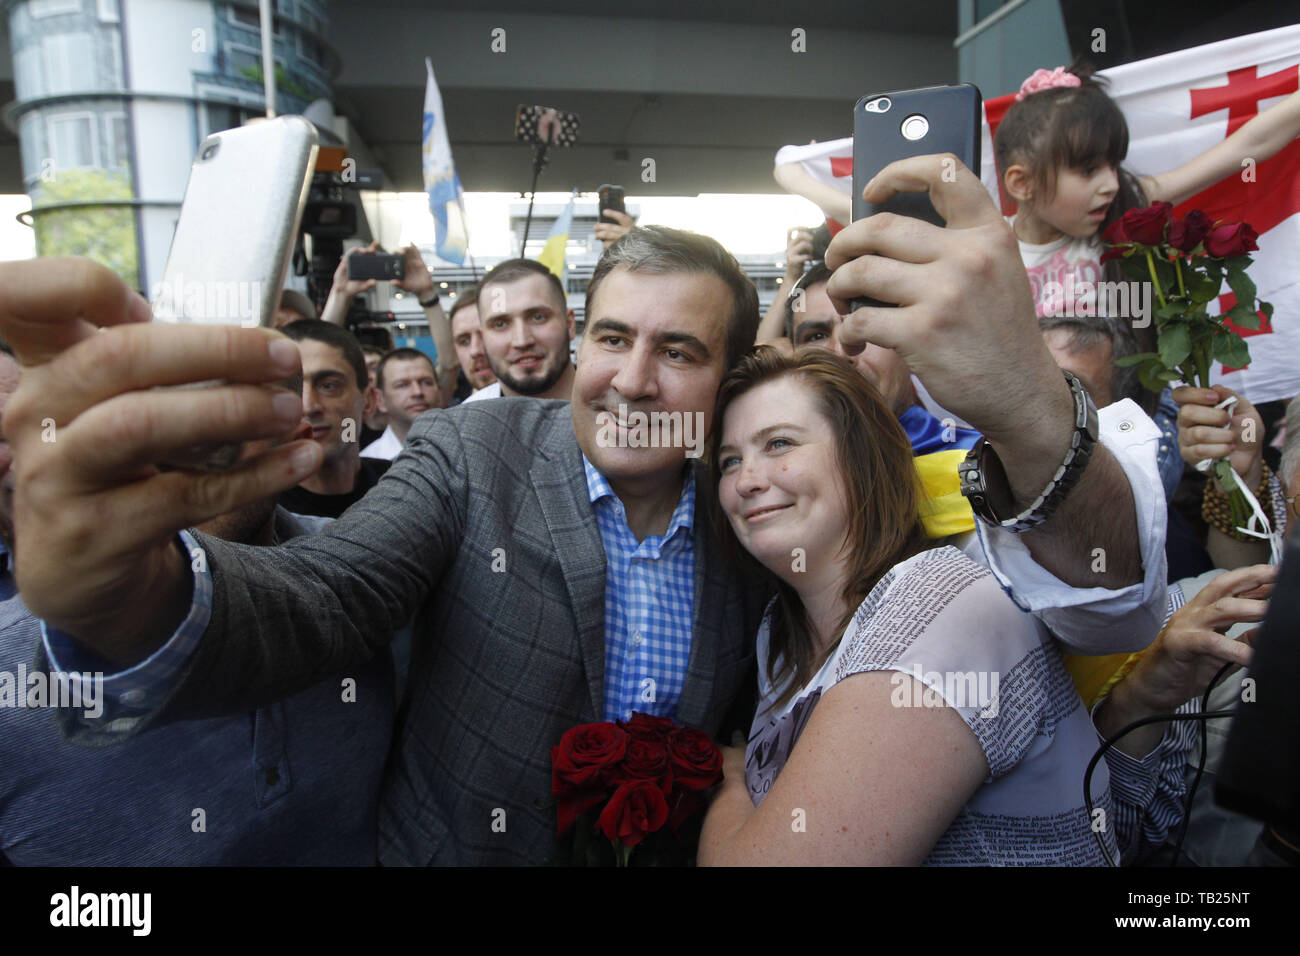 May 29, 2019 - Kiev, Ukraine - Former Georgian president and ex-Odessa Governor MIKHEIL SAAKASHVILI (C) takes a selfie with a supporter, as he arrives to the Boryspil international airport near Kiev, Ukraine, on 29 May 2019. Saakashvili returned to Ukraine after Ukrainian President Volodymyr Zelensky has reinstated Mikheil Saakashvili's Ukrainian citizenship on 28 May 2019. Zelensky deleted the respective provision from his predecessor Petro Poroshenko's No. 196 order dated July 26, 2017, the UNIAN inform agency reported. Ukrainian opposition leader Mikheil Saakashvili was deported to Poland o Stock Photo